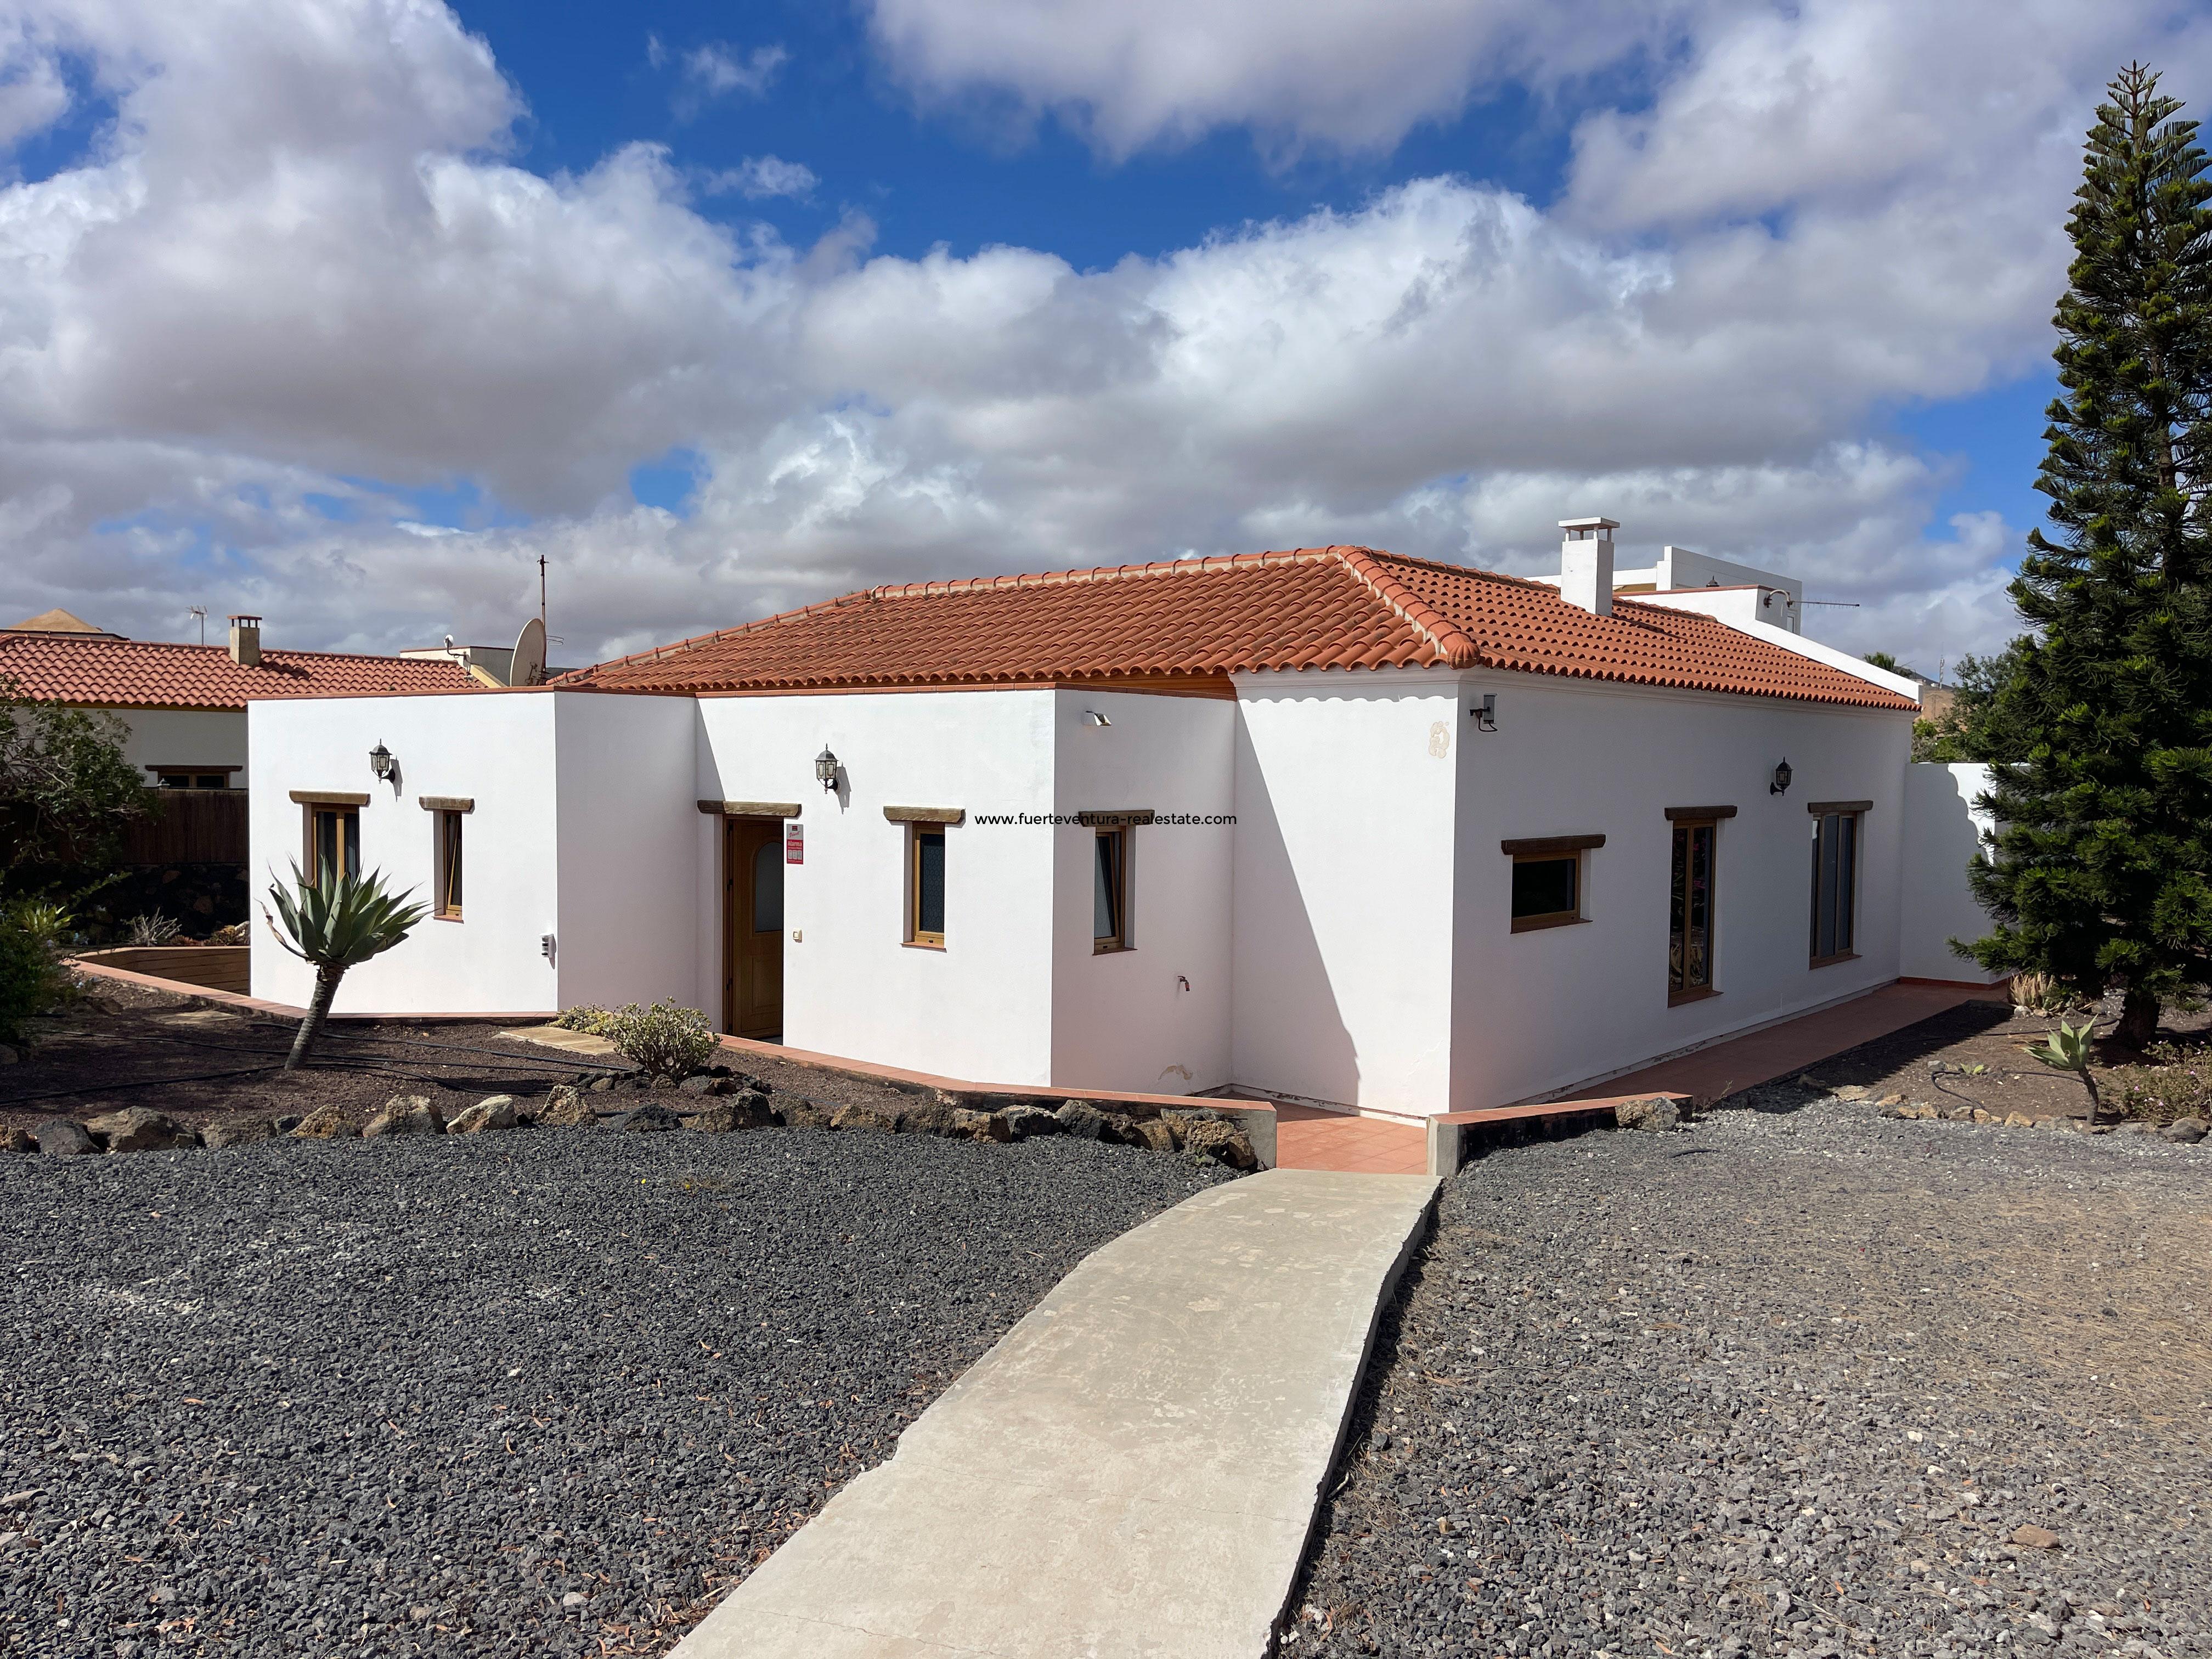 For sale! Very nice villa with 5 bedrooms and heated pool in Villaverde